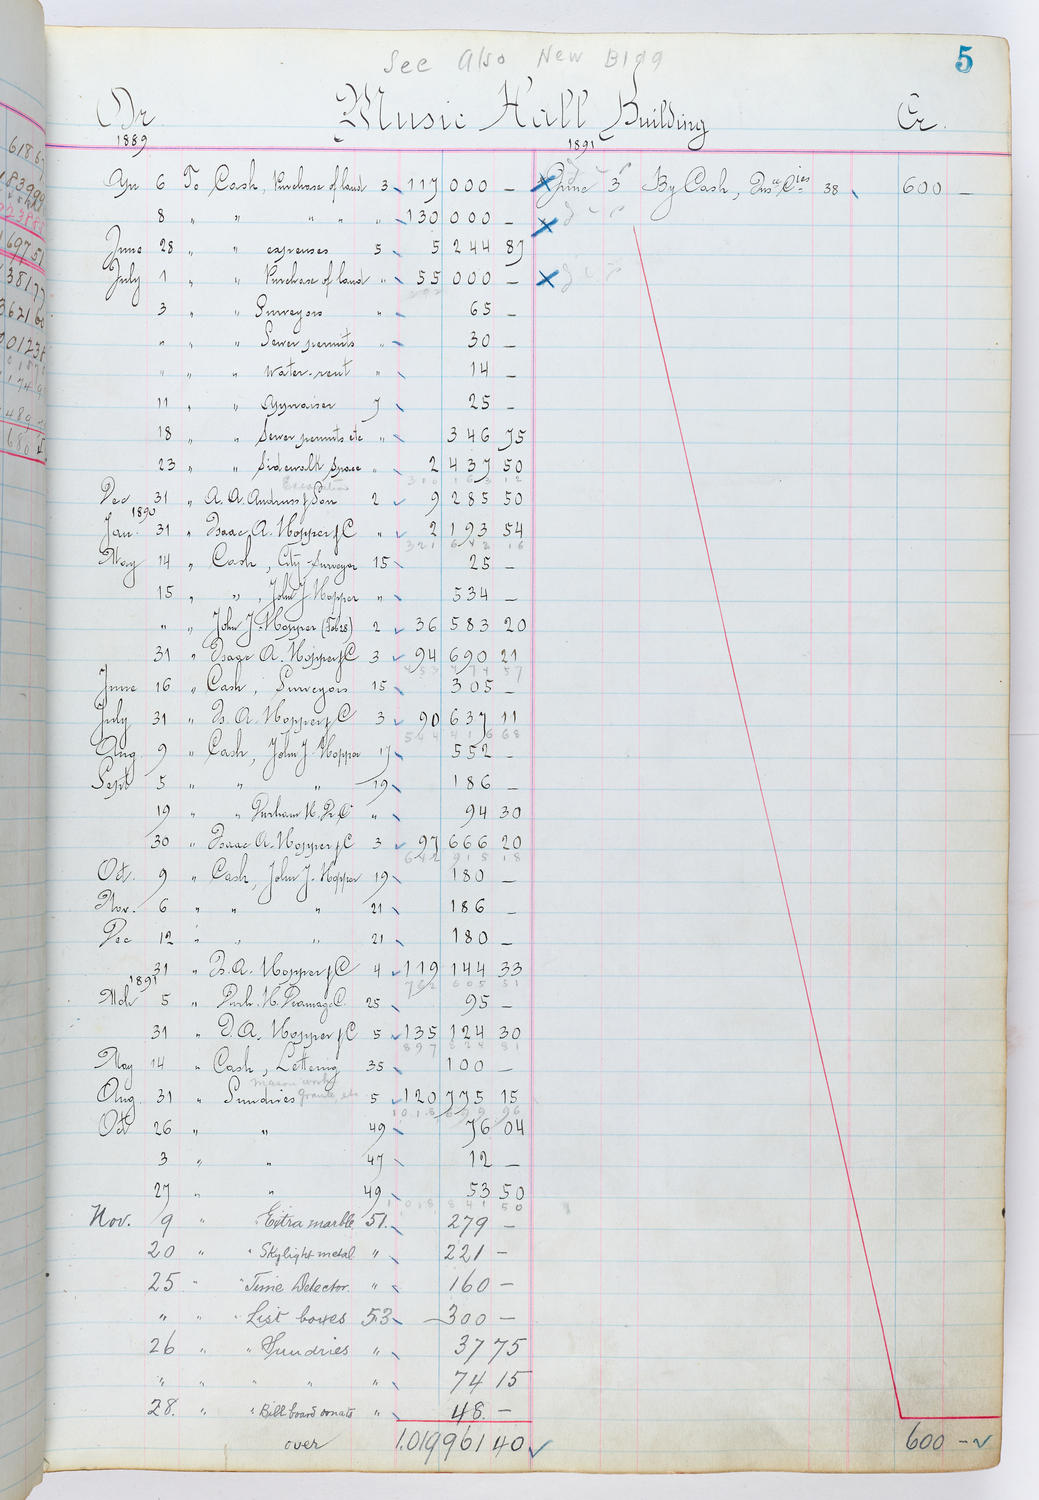 Music Hall Accounting Ledger, volume 1, page 5